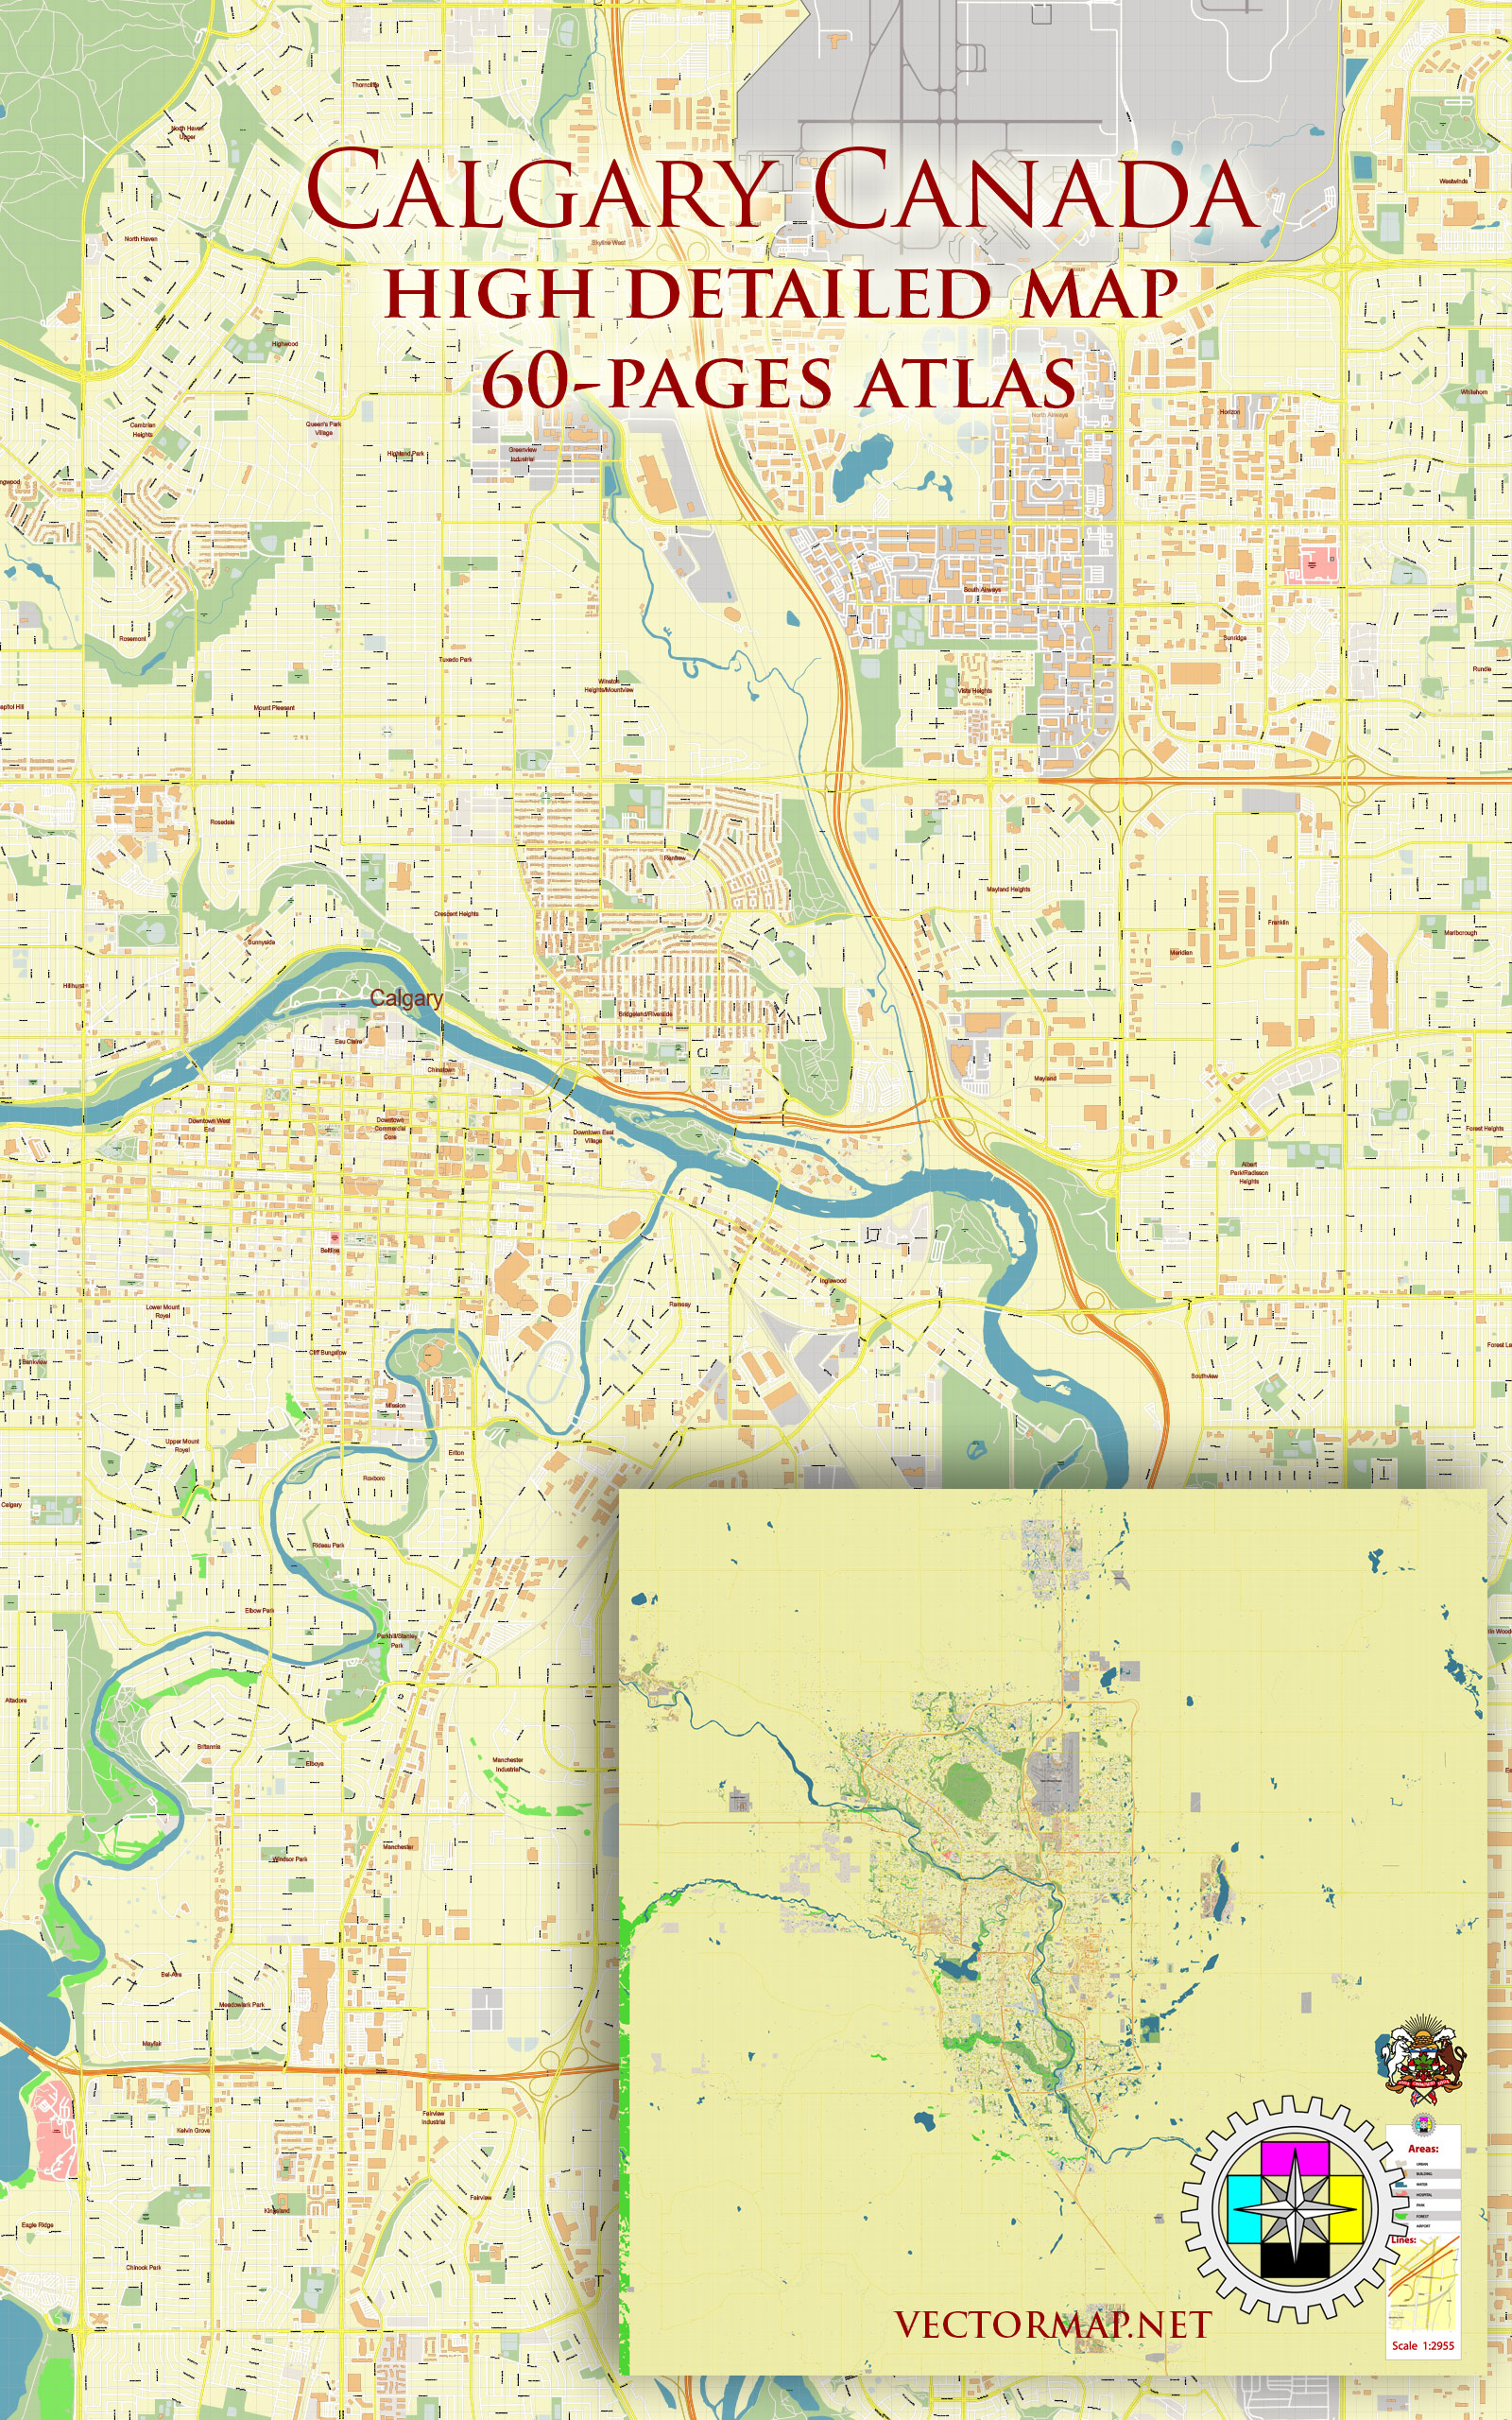 Calgary Canada Street Map Tourist Map multi-page atlas, contains 60 pages vector PDF